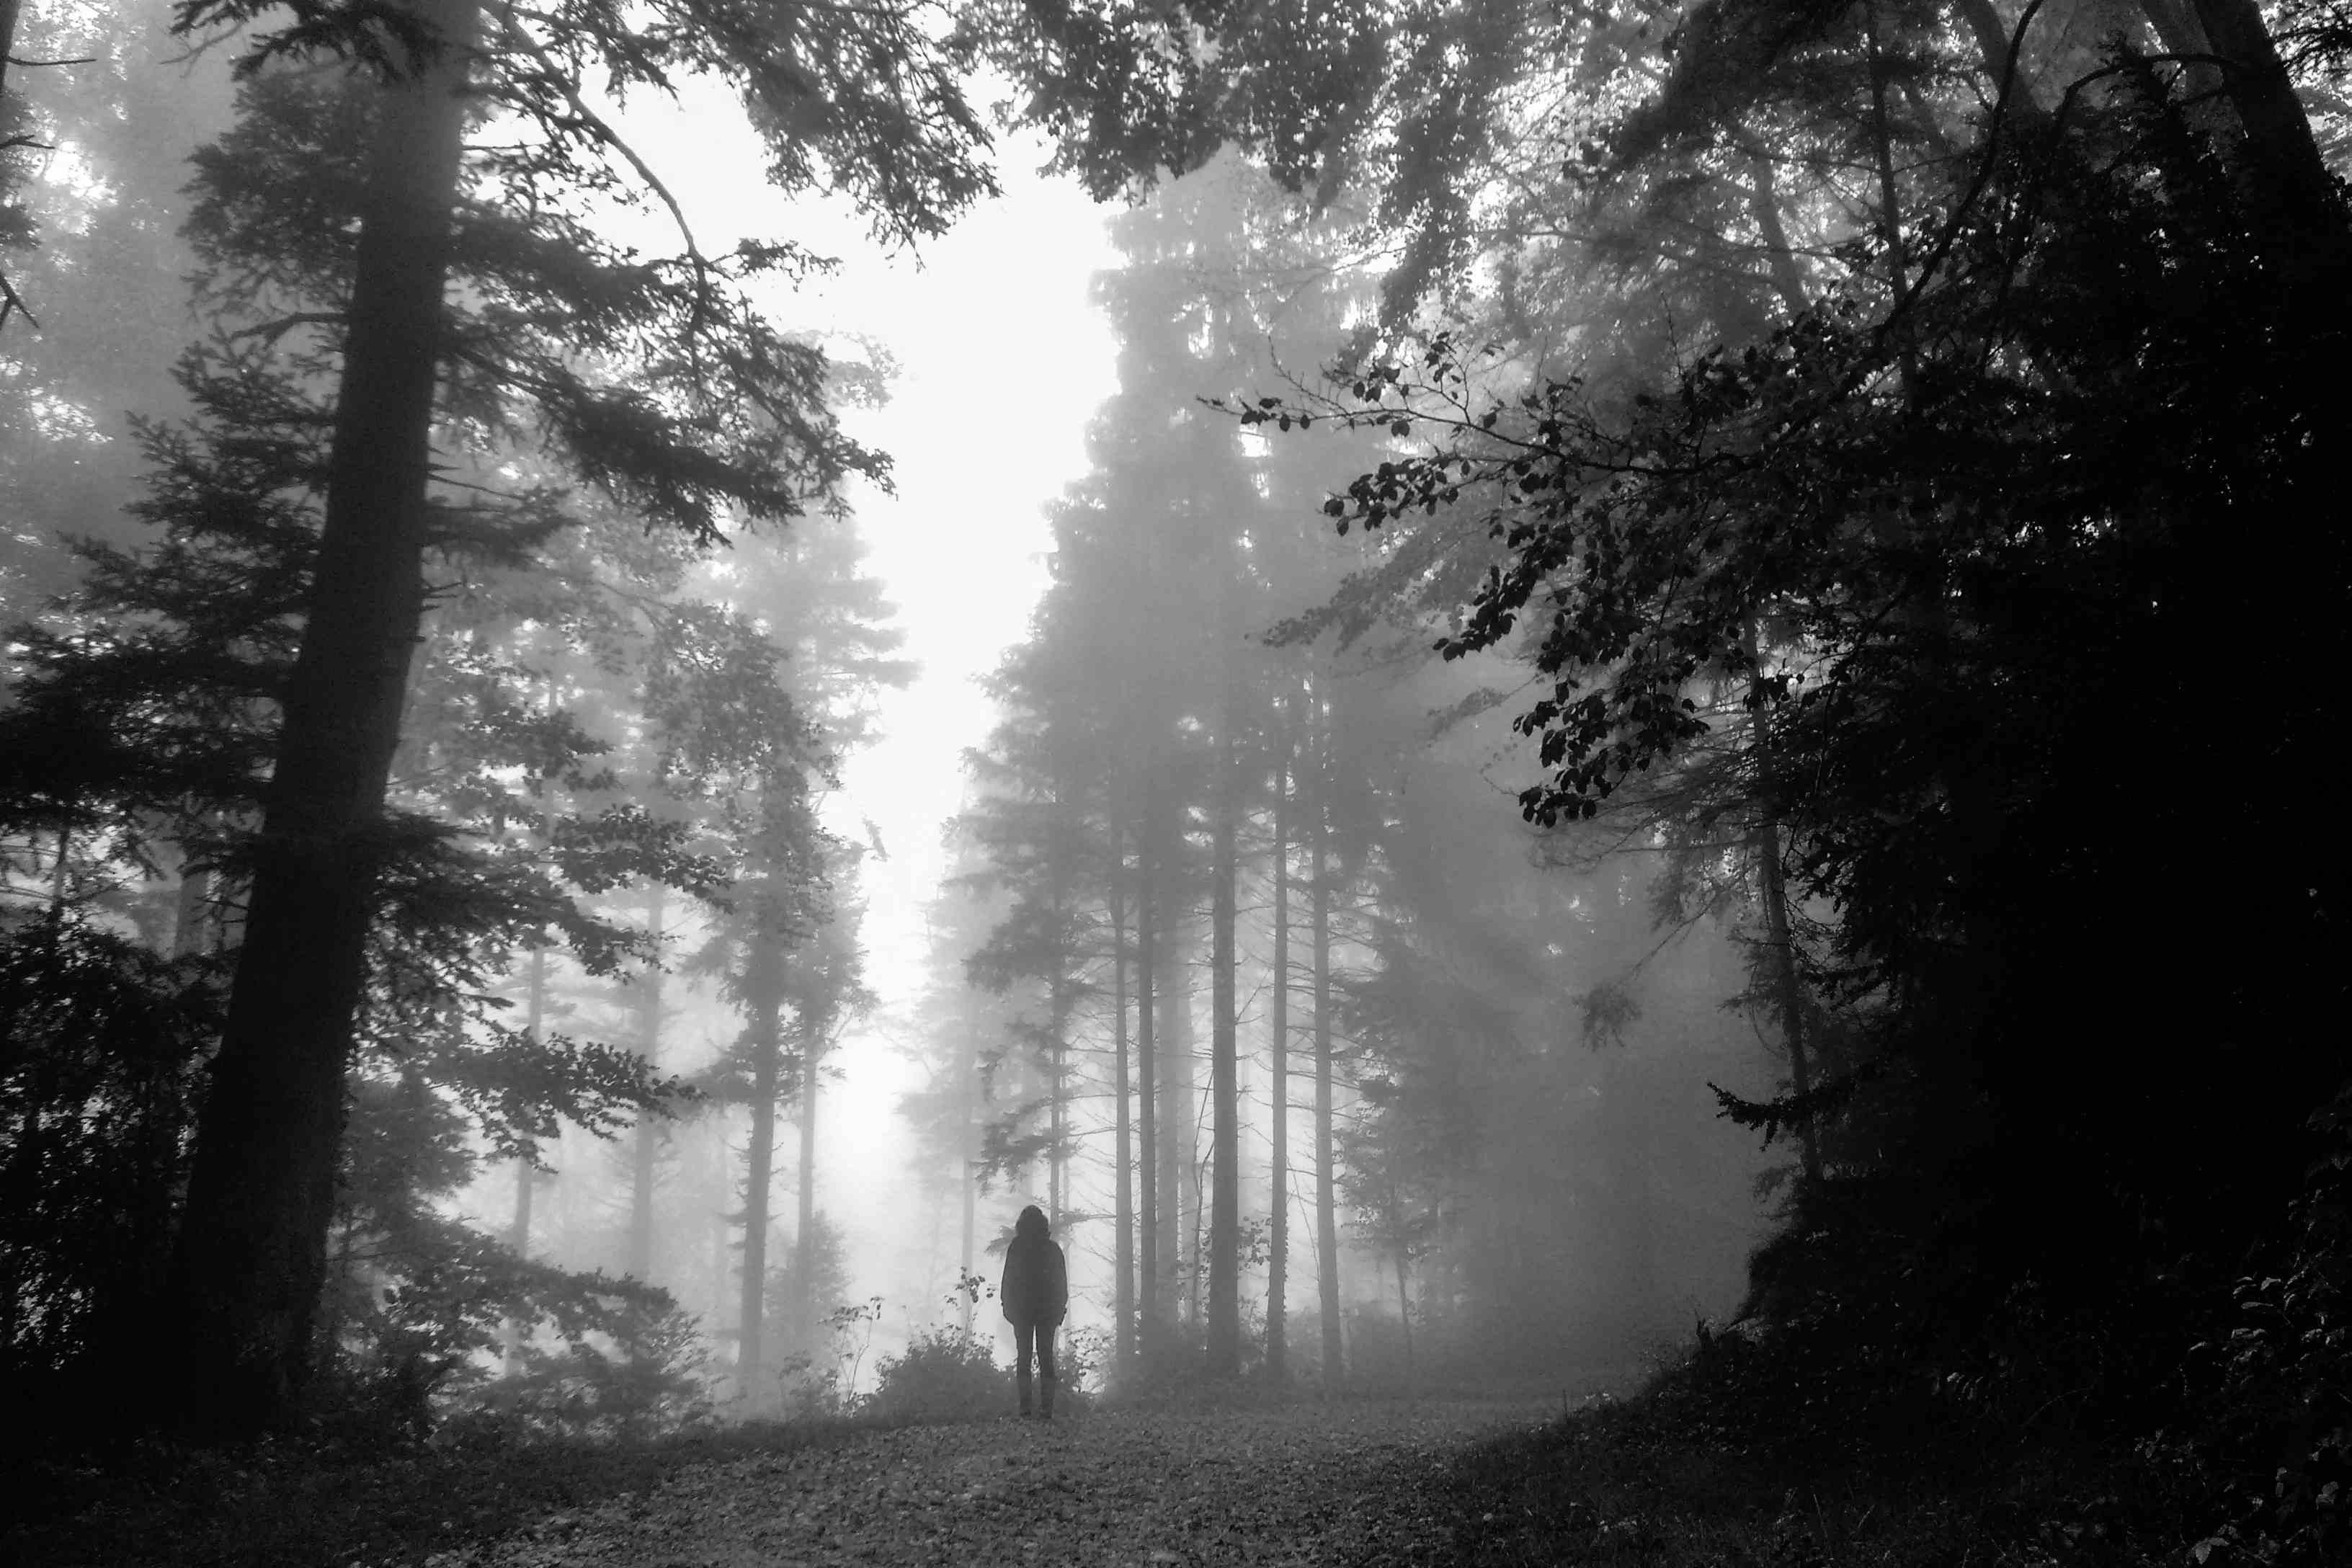 The Girl and the Fog